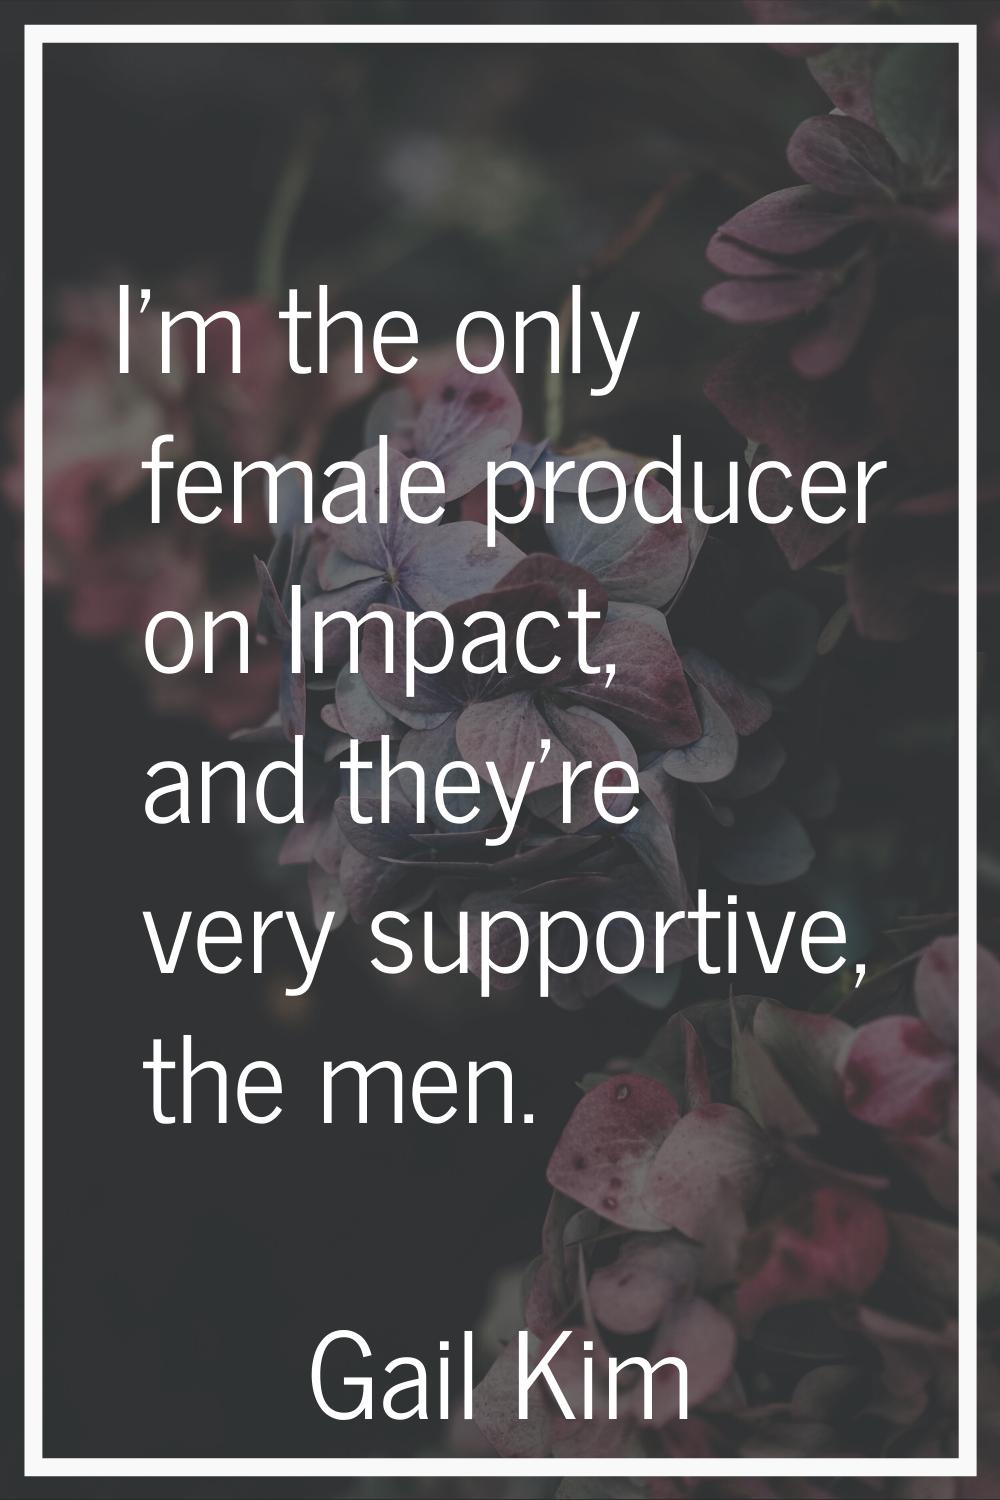 I'm the only female producer on Impact, and they're very supportive, the men.